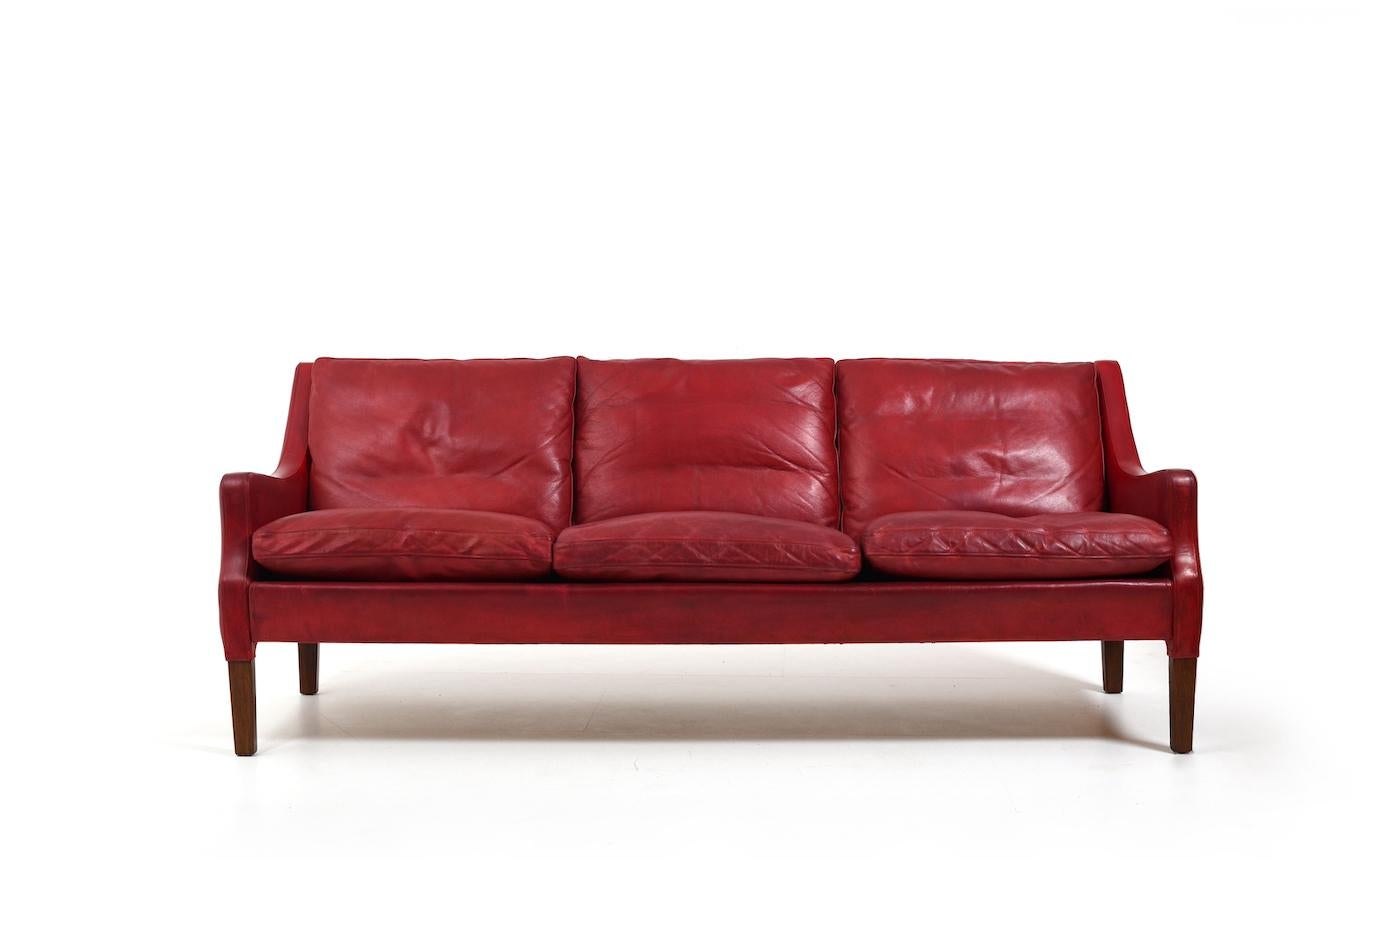 Beautiful patinated „Indian Red“ leather sofa. Designed by Arne Wahl Iversen for own use and been in the family until recently. With teak legs. Denmark 1960s.